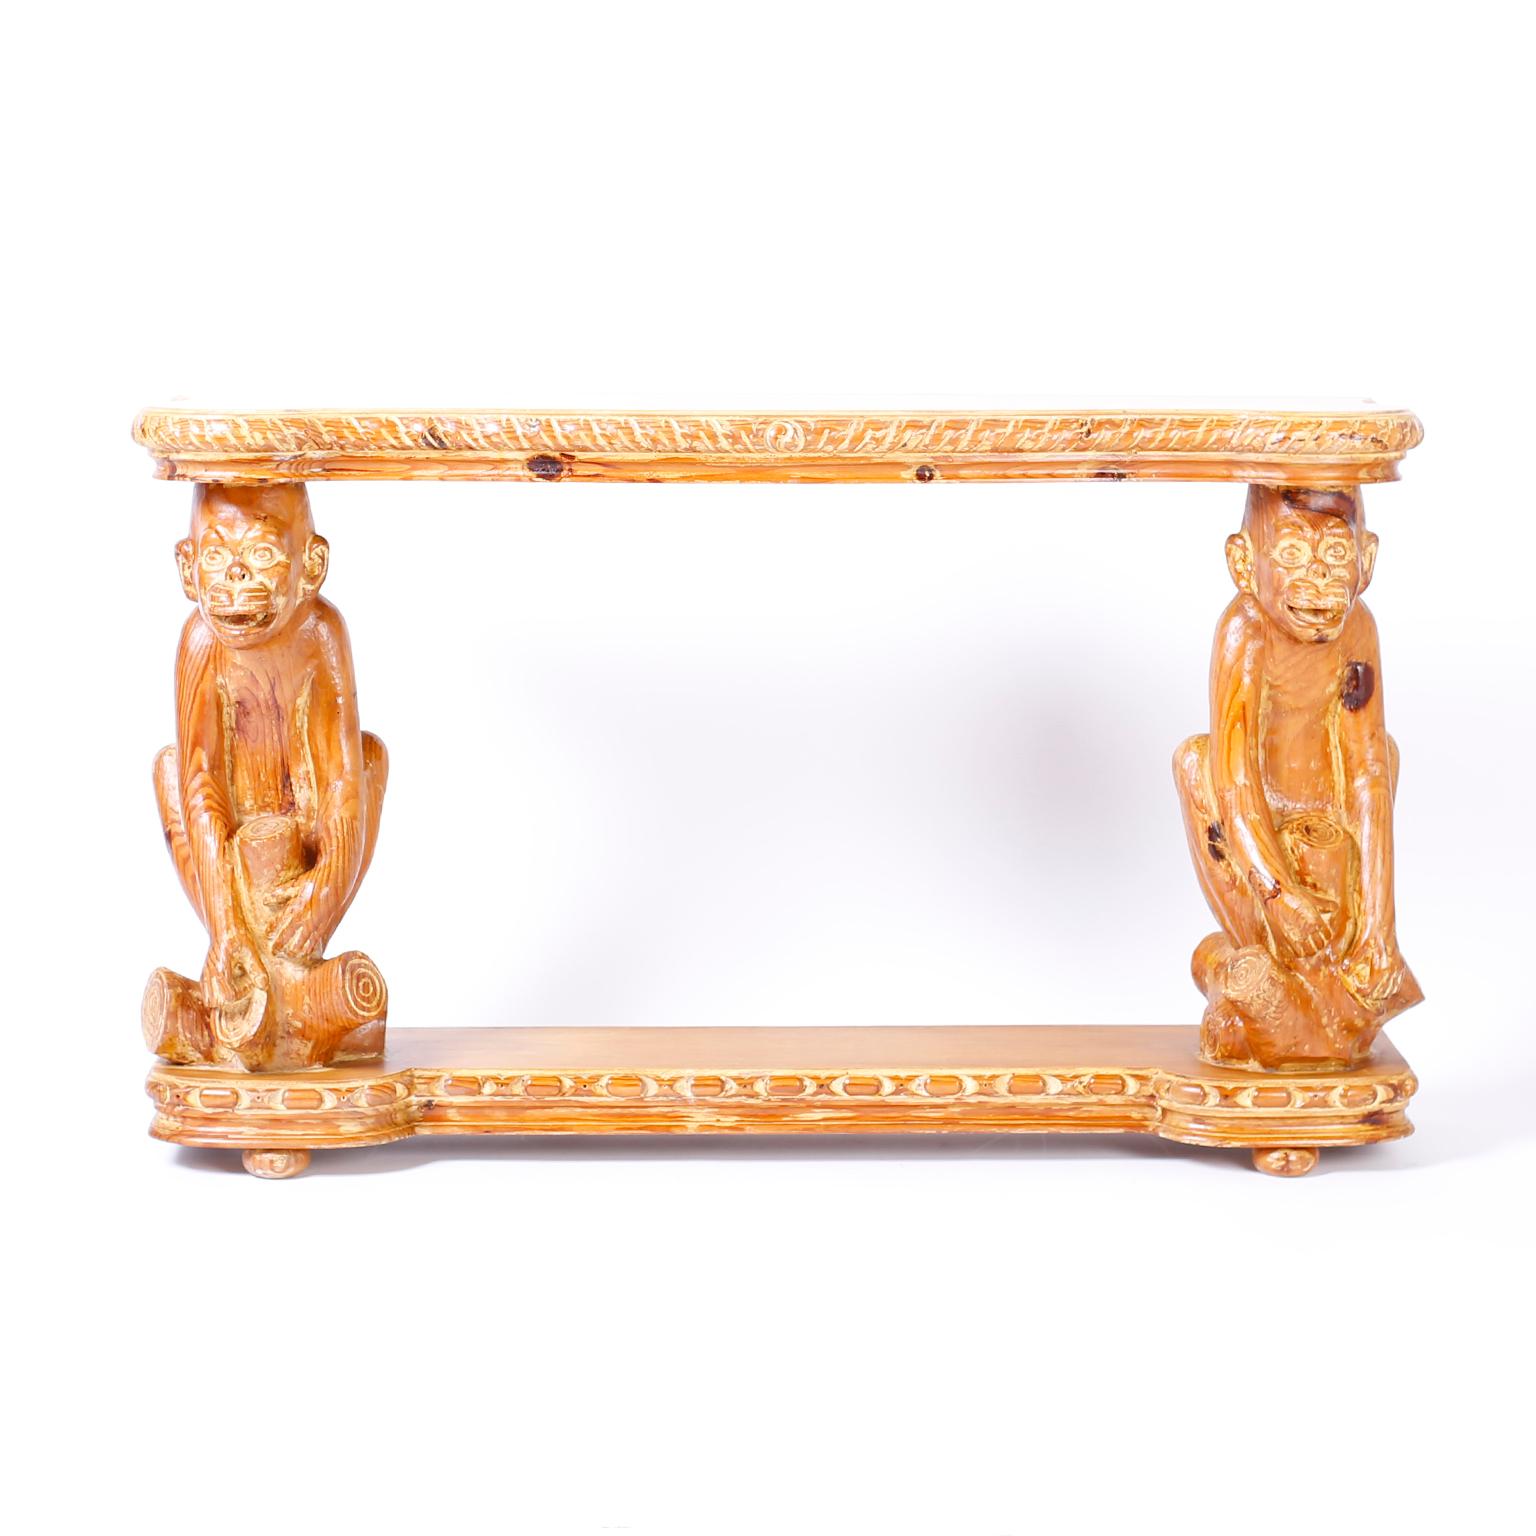 Whimsical carved pine console table with a desirable slim profile, scalloped top, carved monkey supports and a stylized base with bun feet.